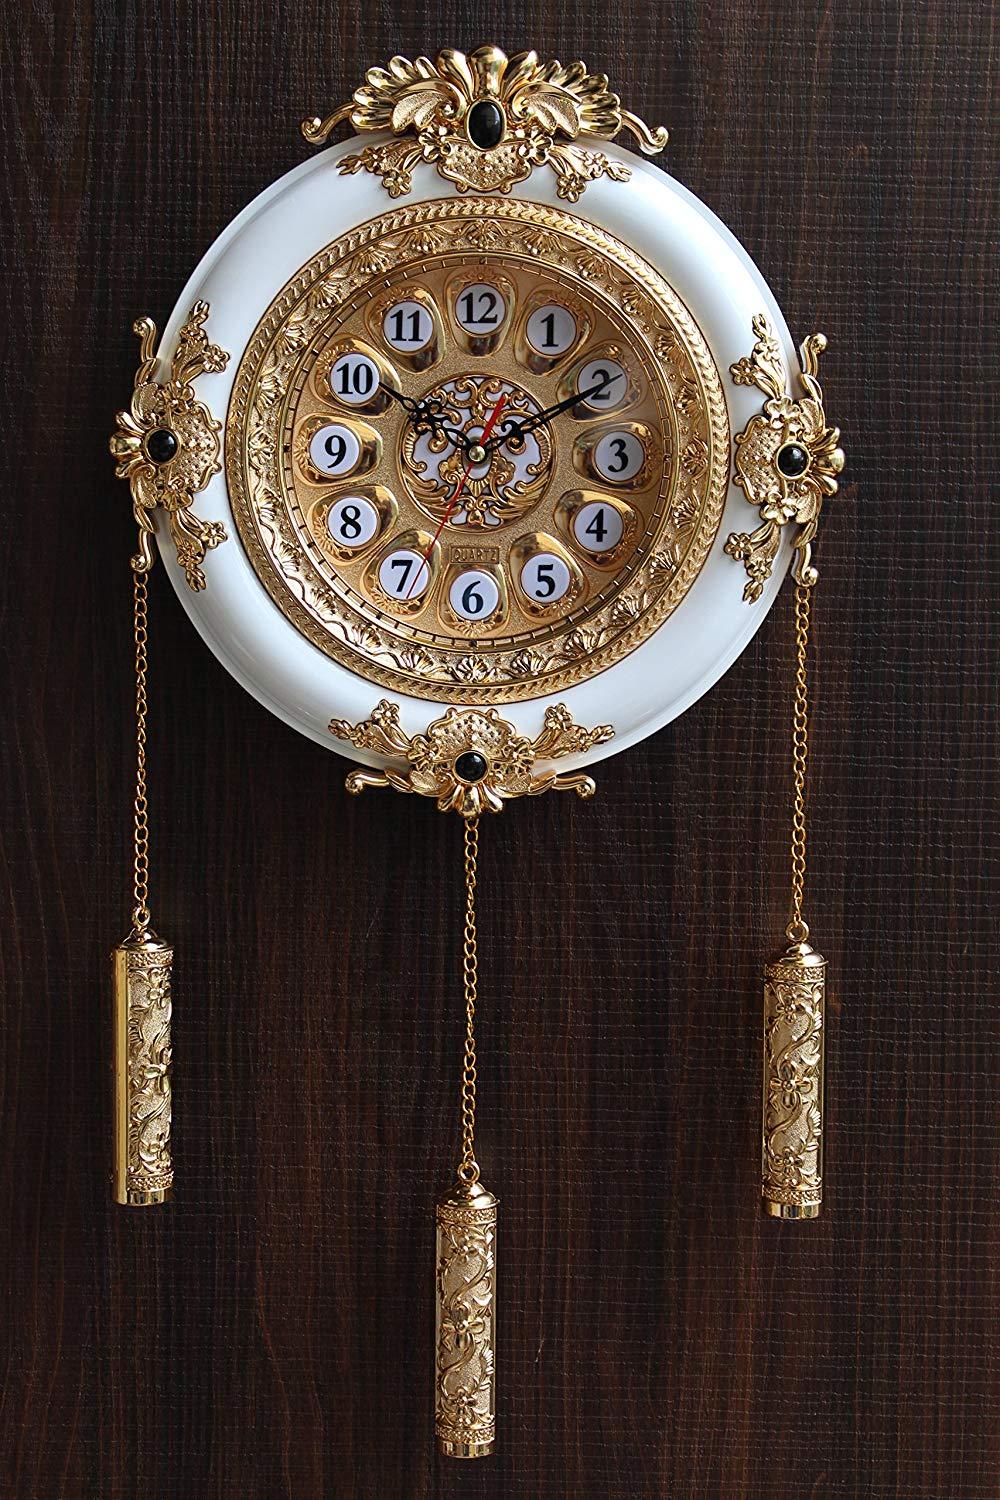 FunkyTradition Royal Designer Gold Plated White Premium String Hanging Wall Clock for Home Office Decor 55 cm Tall